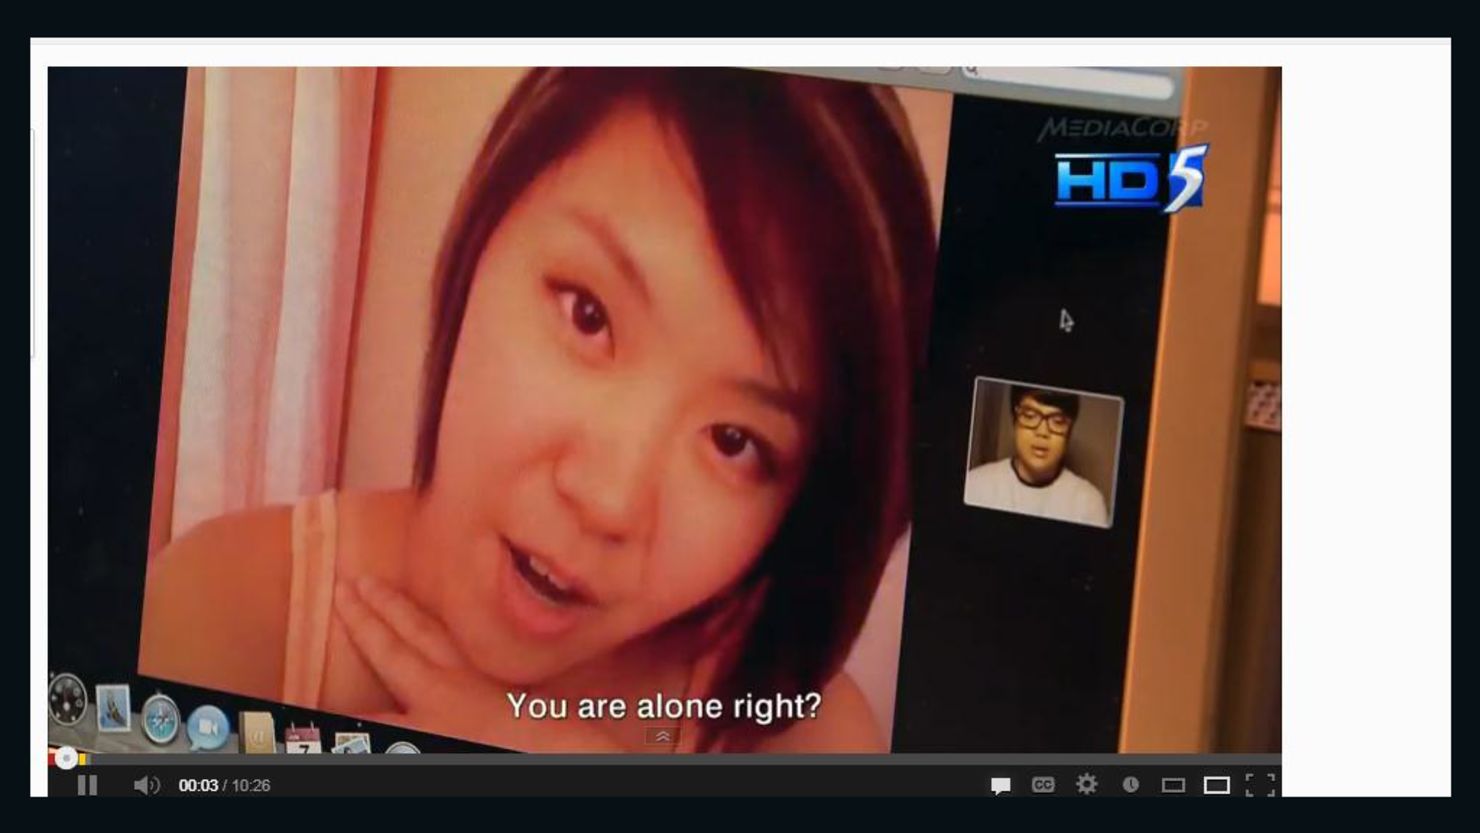 A Singapore TV station created a 10-minute "reconstruction" of how a webcam-blackmail scam may have gone down.